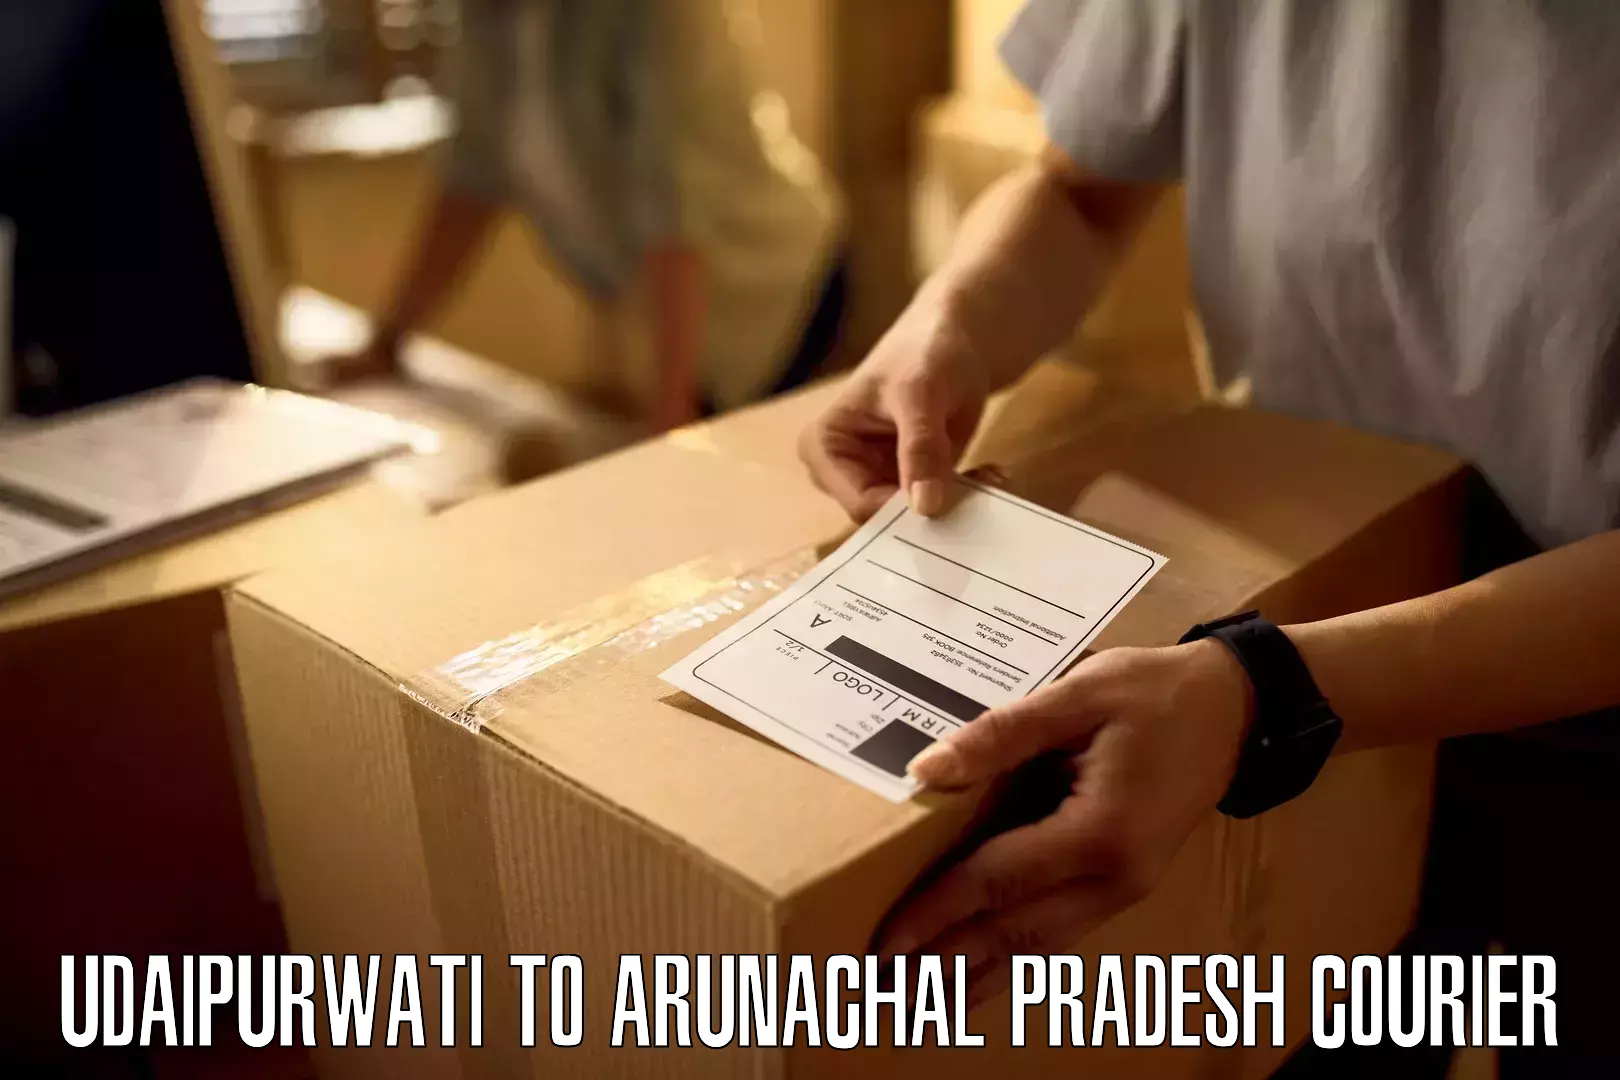 Automated parcel services Udaipurwati to Tezu